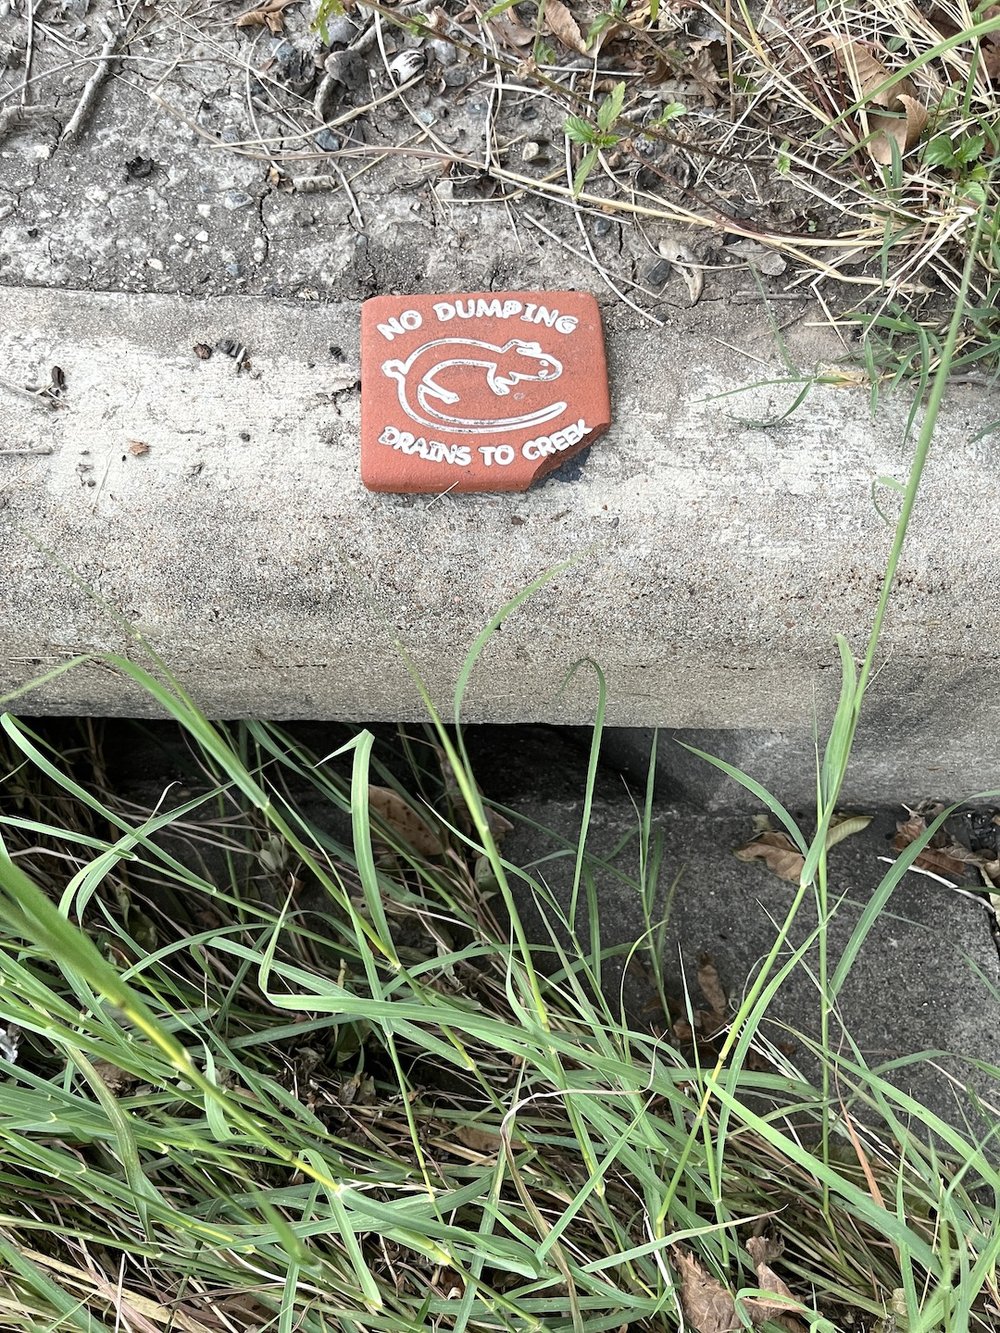 storm drain with no dumping drains to creek tile.JPG